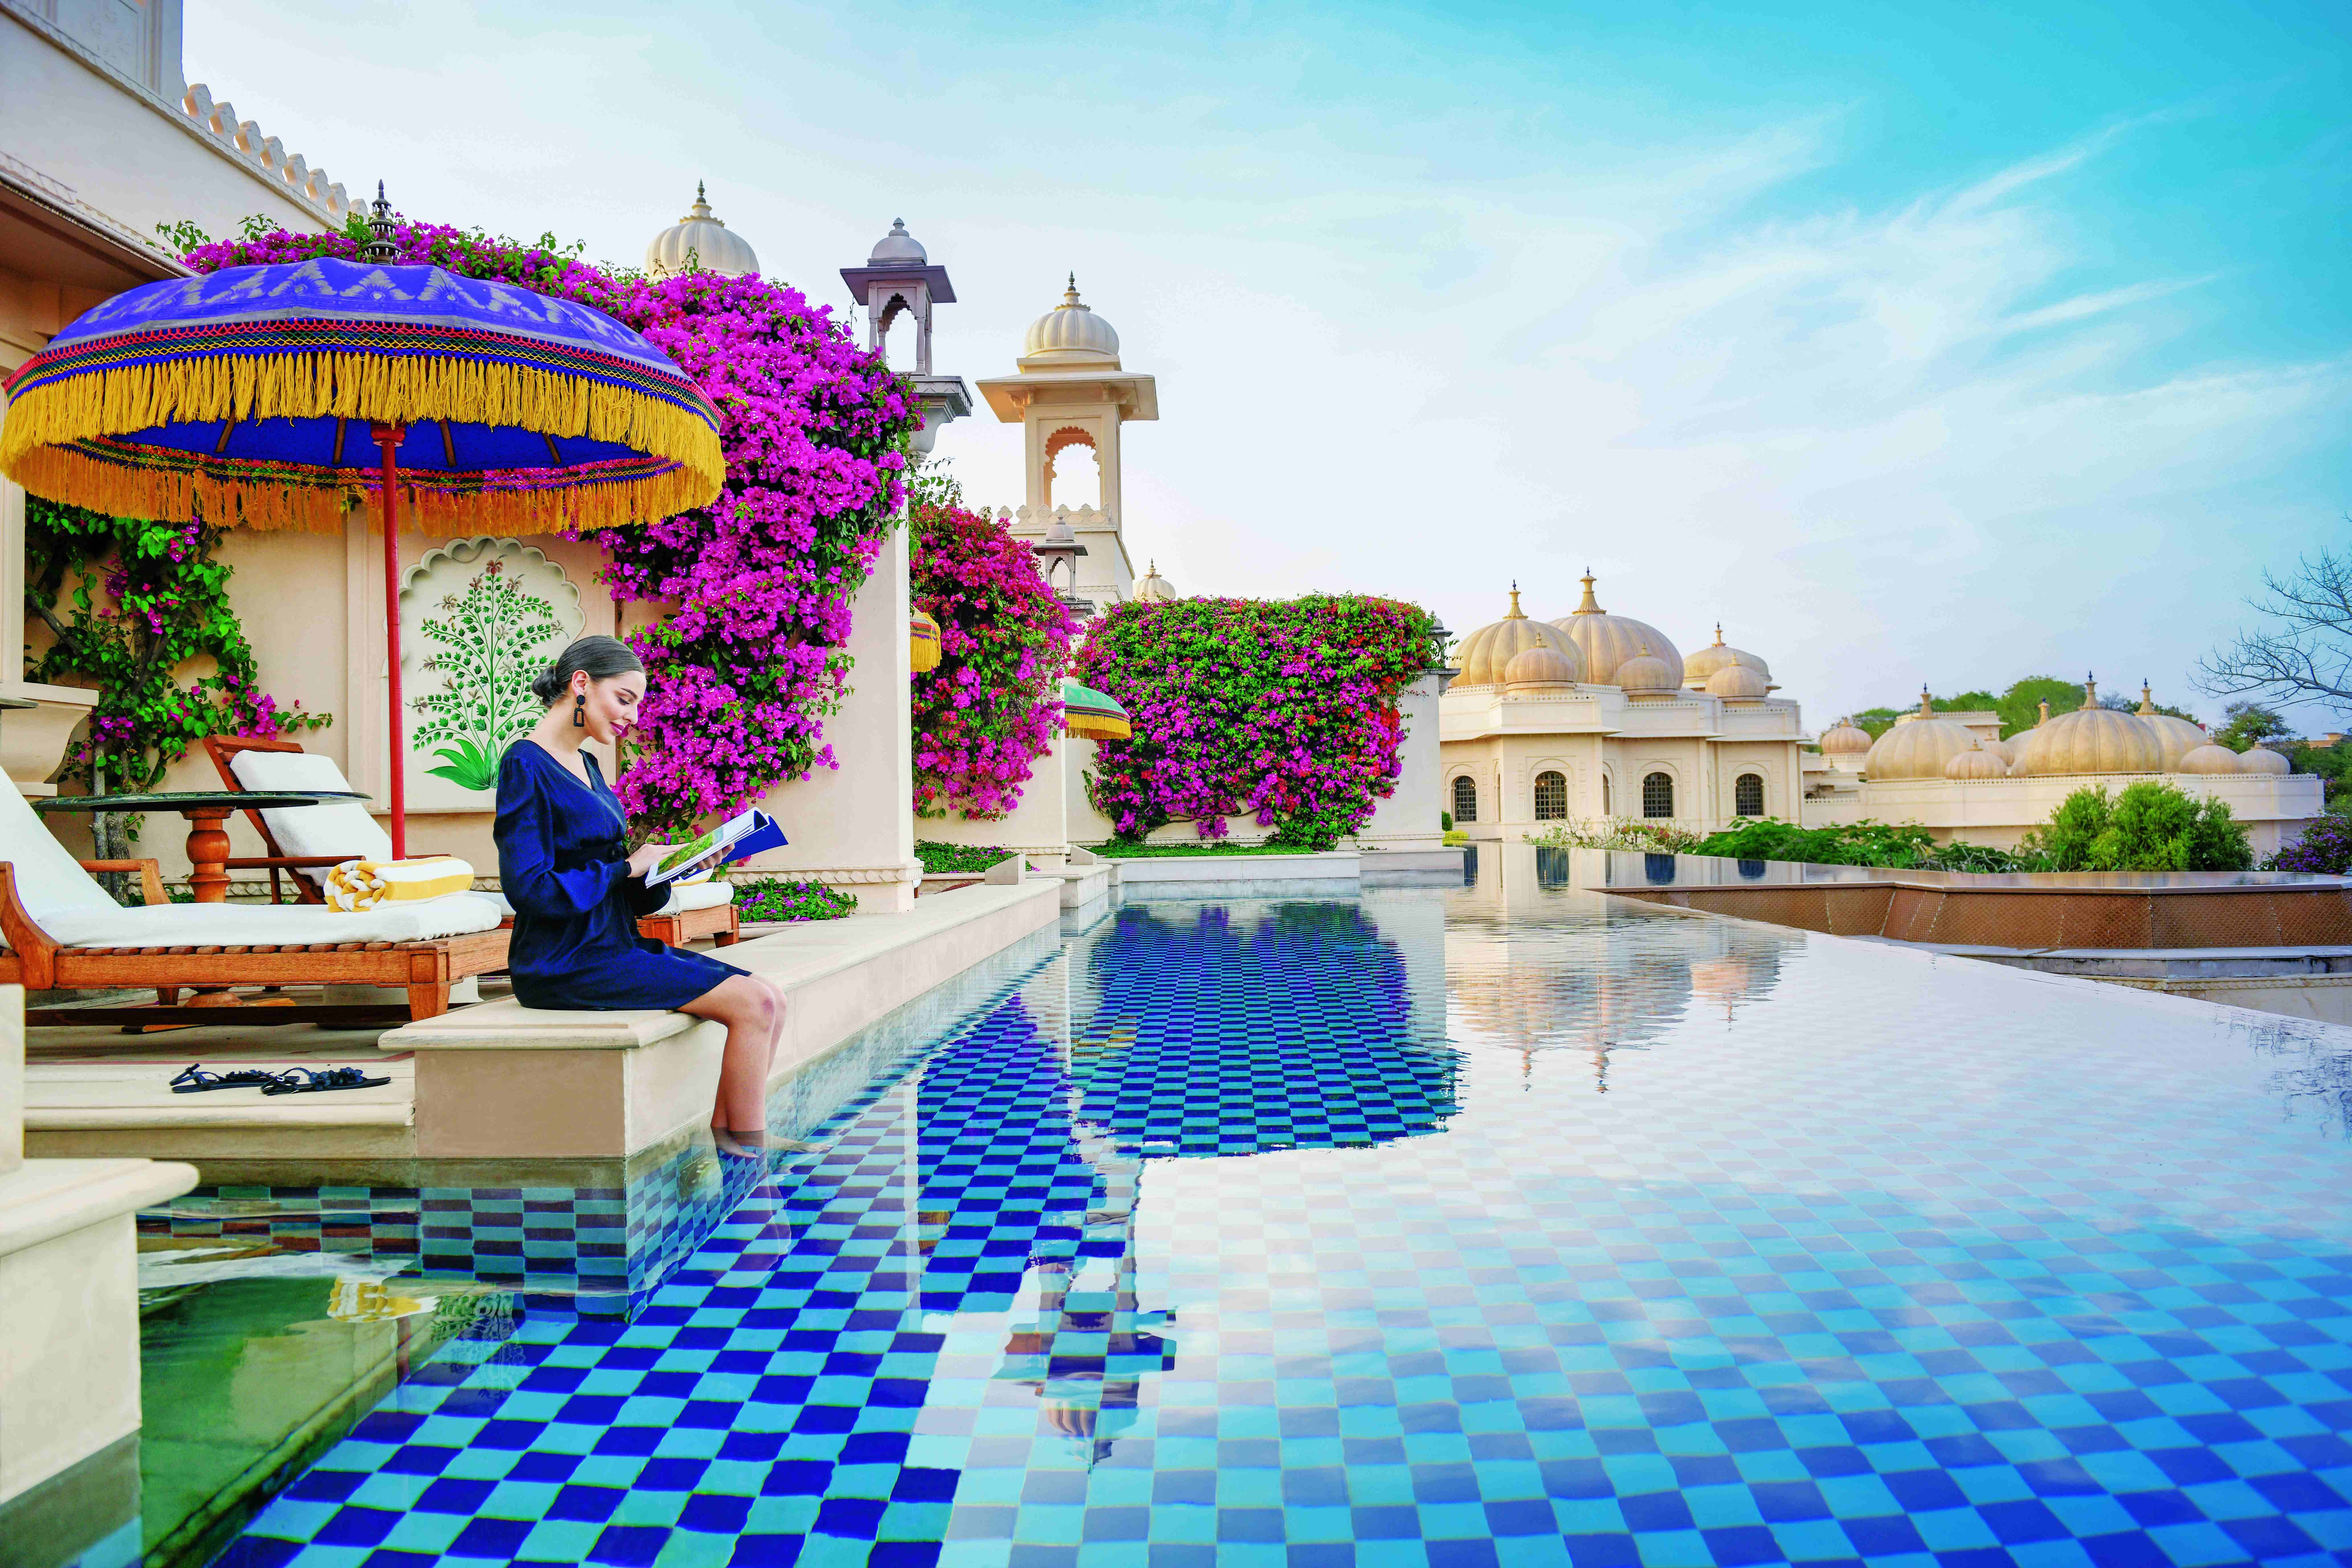 A Guide to Top 5 Luxury Hotels in India for a Lavish India Trip